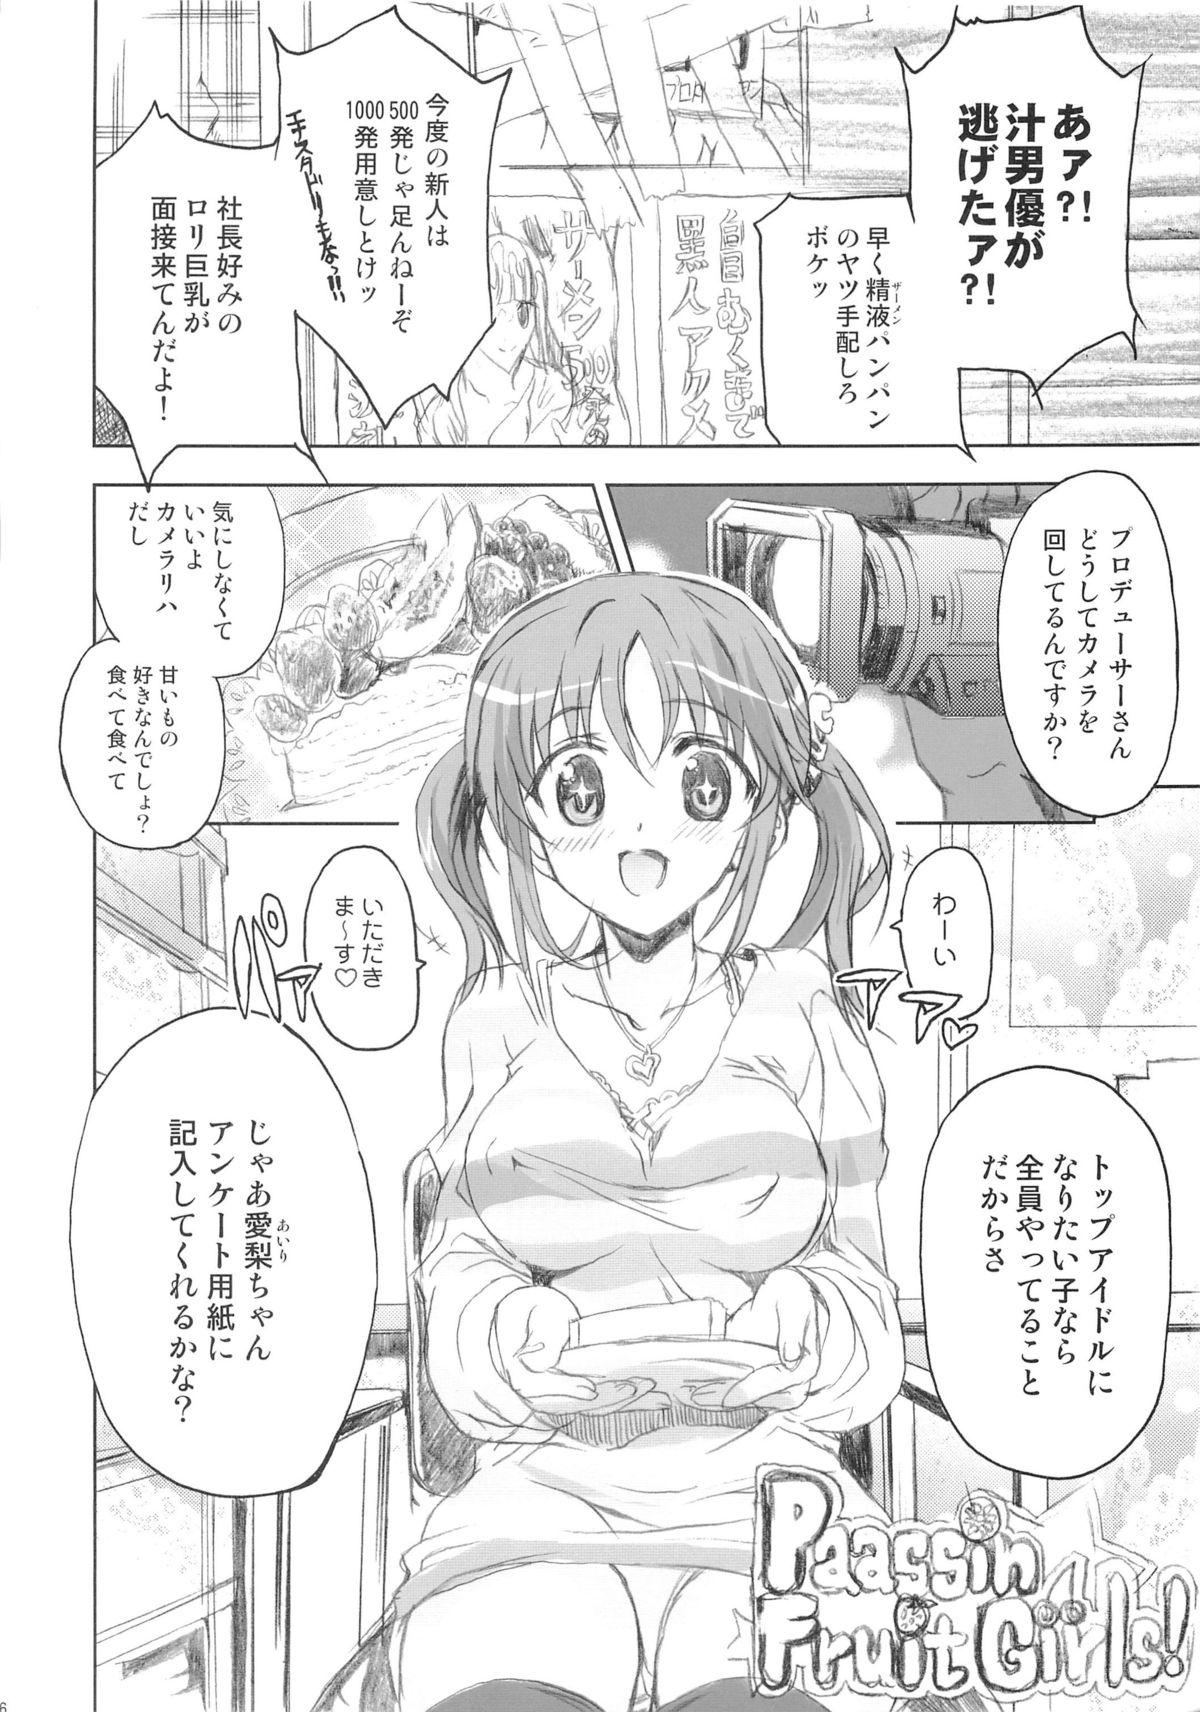 Private PASSION FRUITS GIRLS #1 "Totoki Airi" - The idolmaster Topless - Page 5